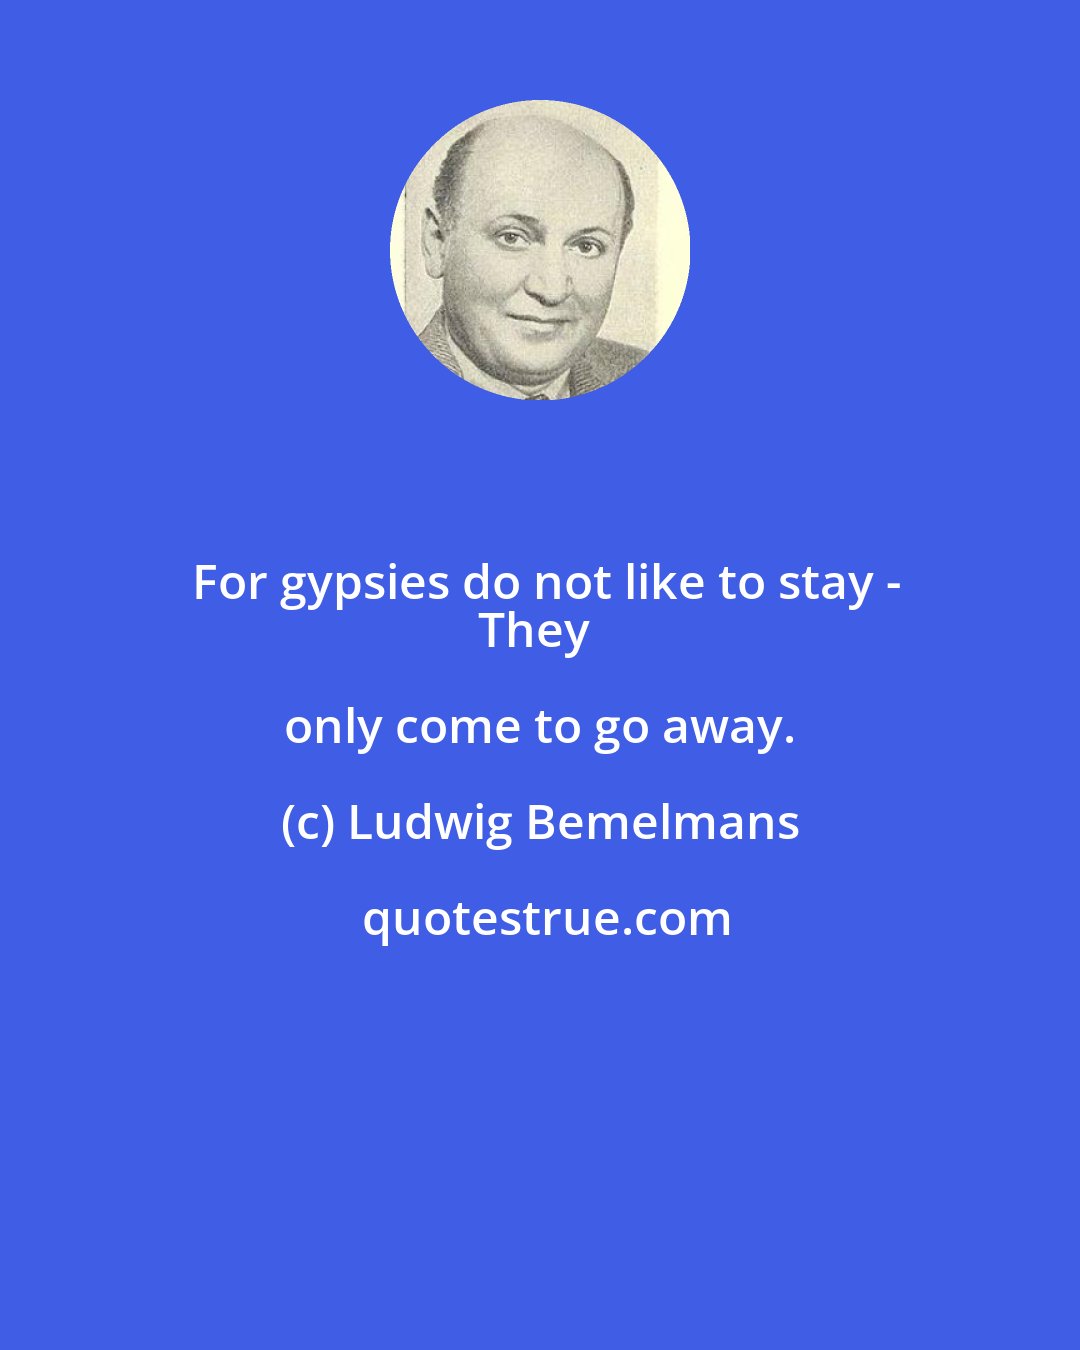 Ludwig Bemelmans: For gypsies do not like to stay -
They only come to go away.